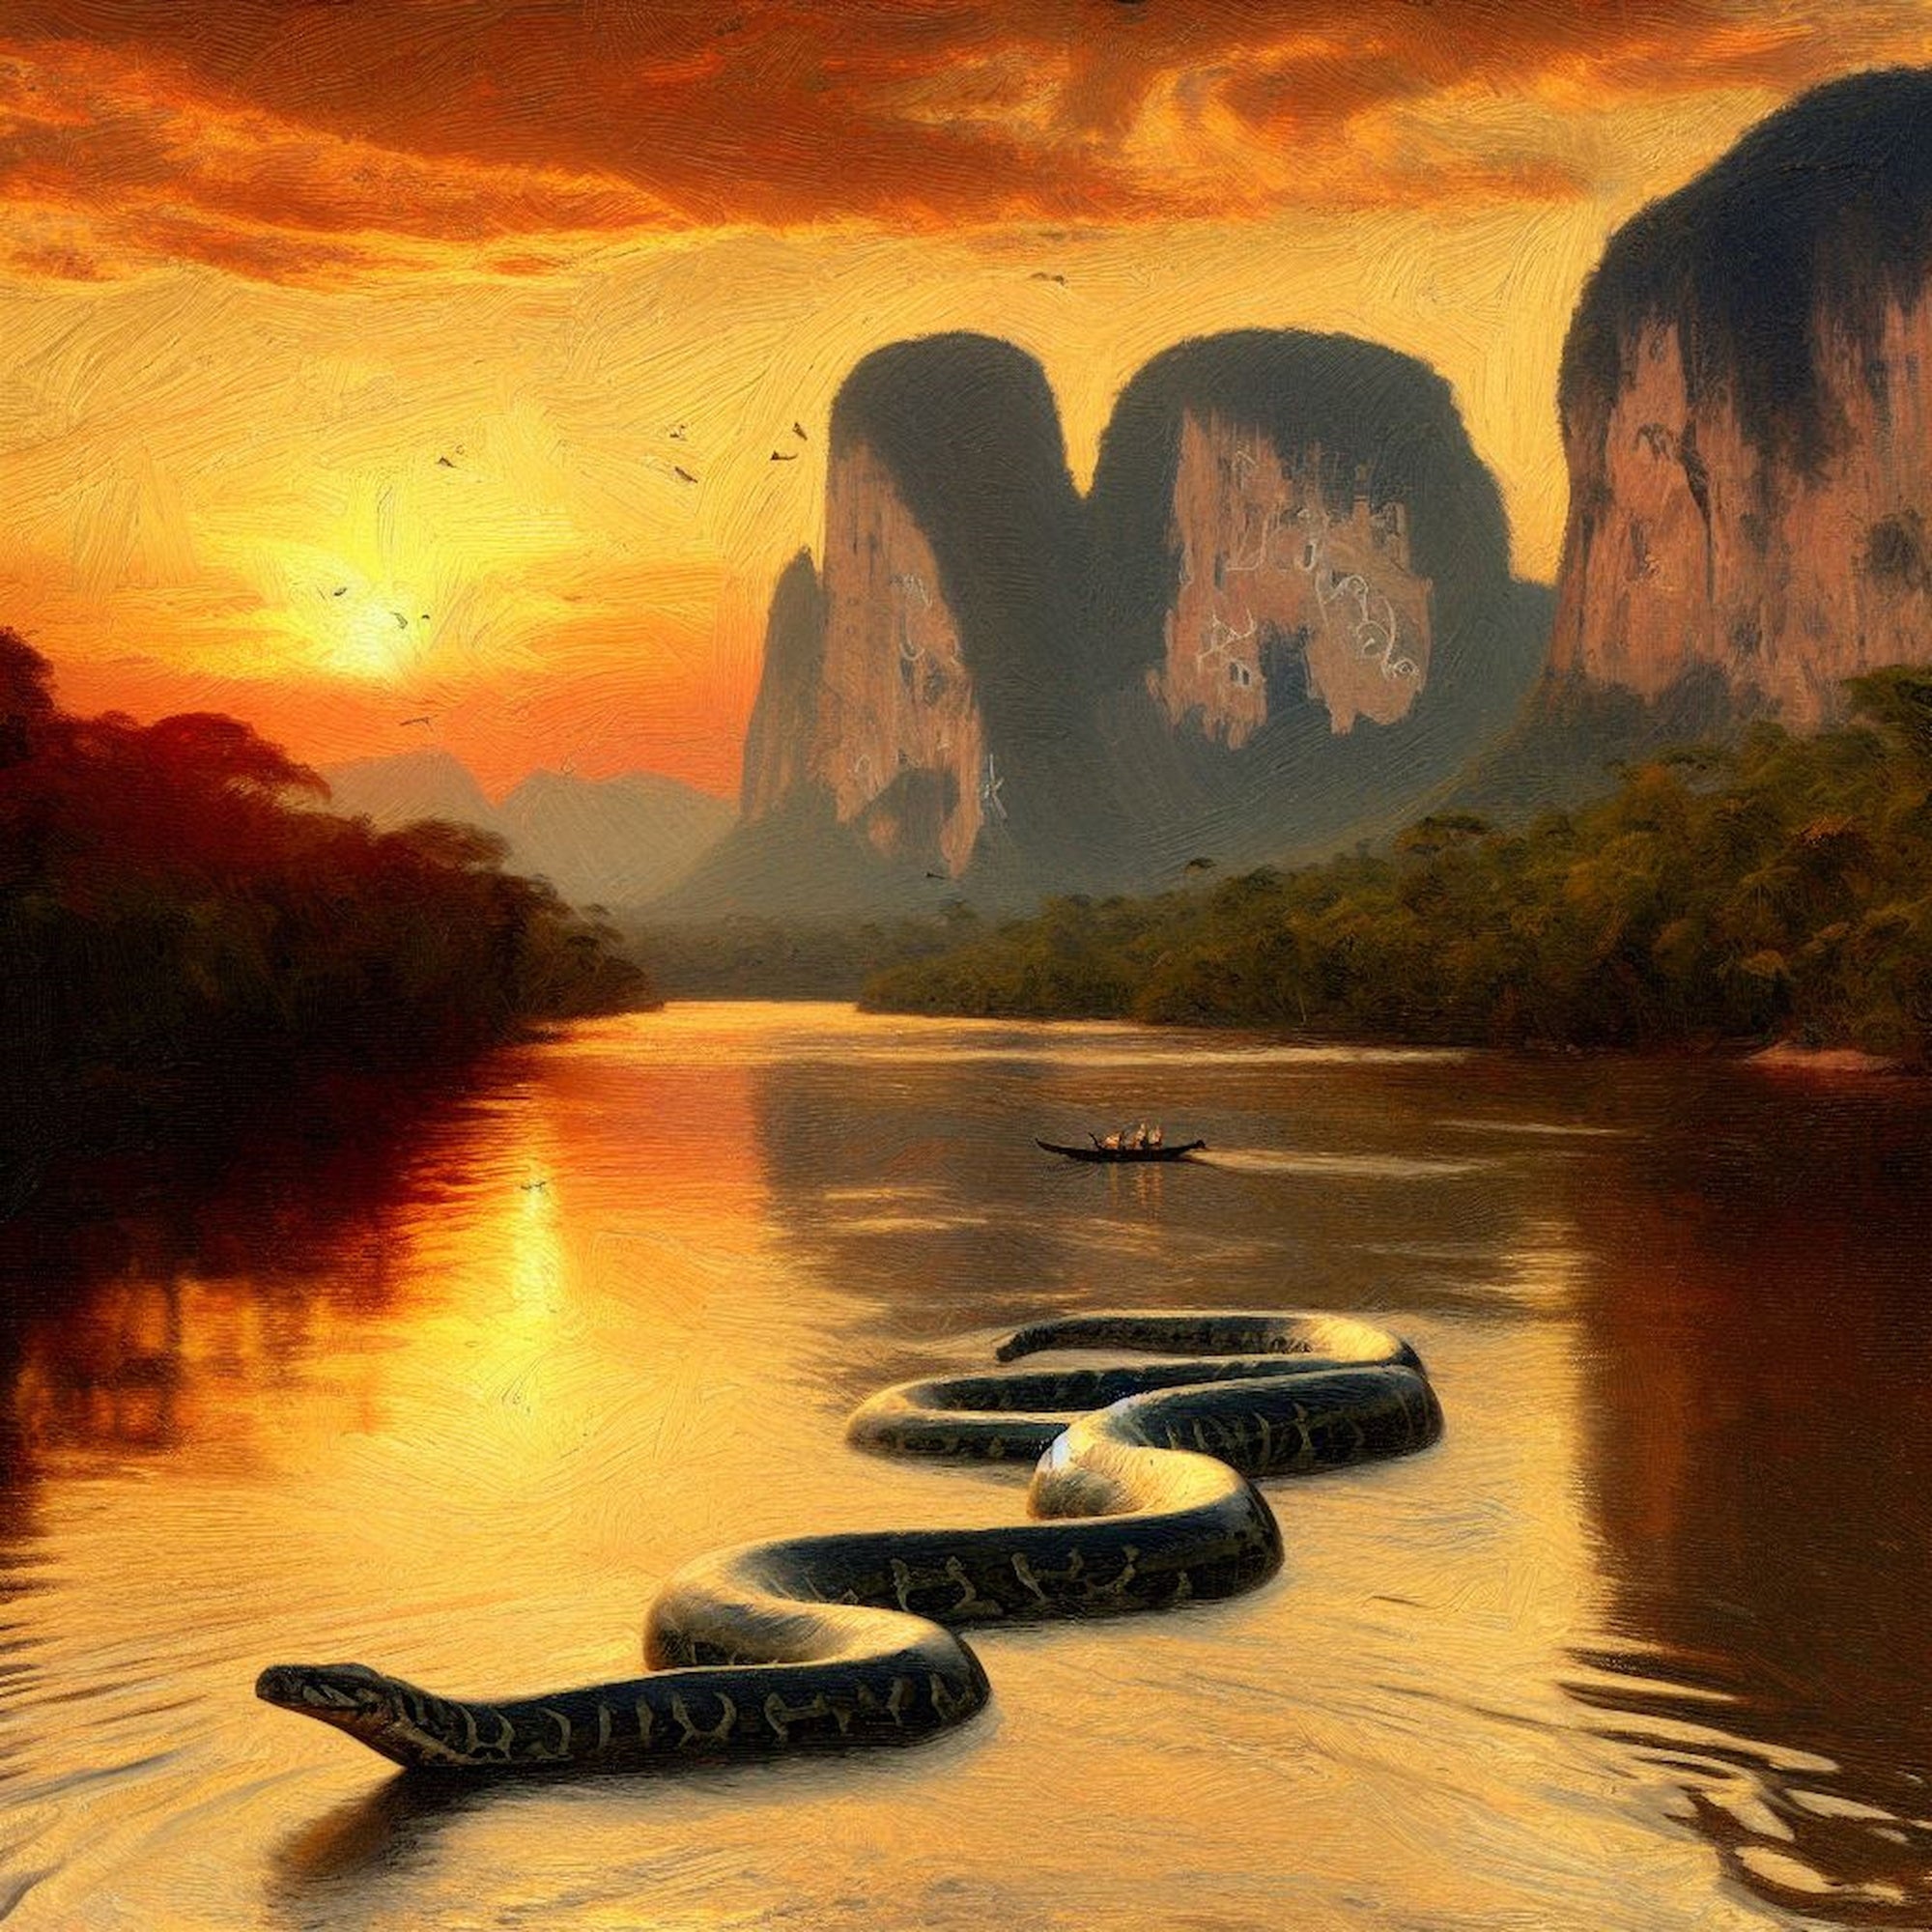 Artistic impressions of a gigantic mythical snake traversing the Orinoco River during sunset with rock carvings visible on the cliffsides of rock formations in the distance